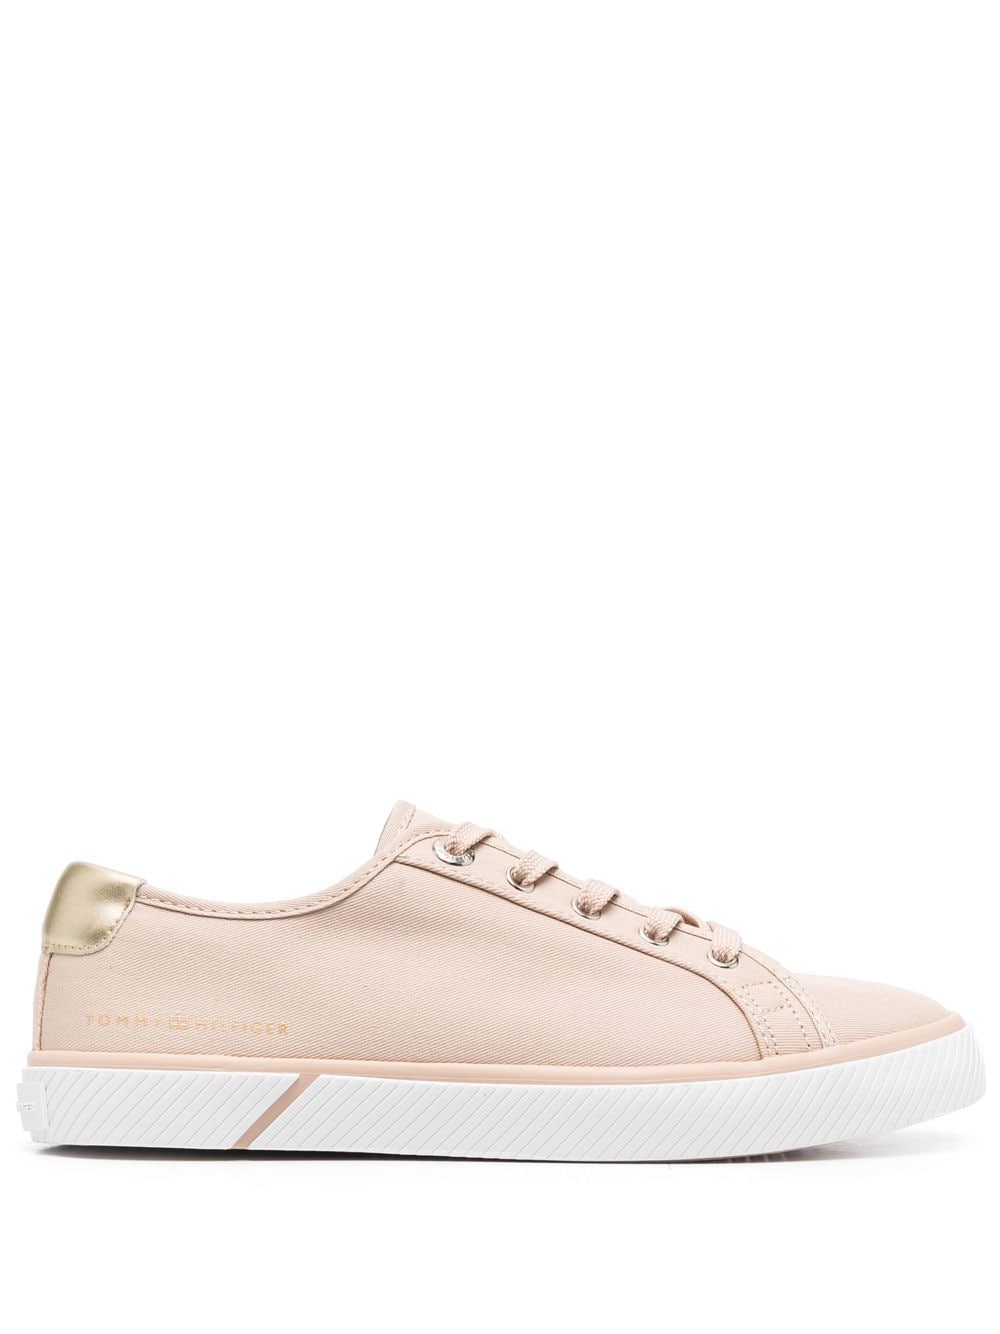 Tommy Hilfiger low-top lace-up sneakers - Pink von Tommy Hilfiger